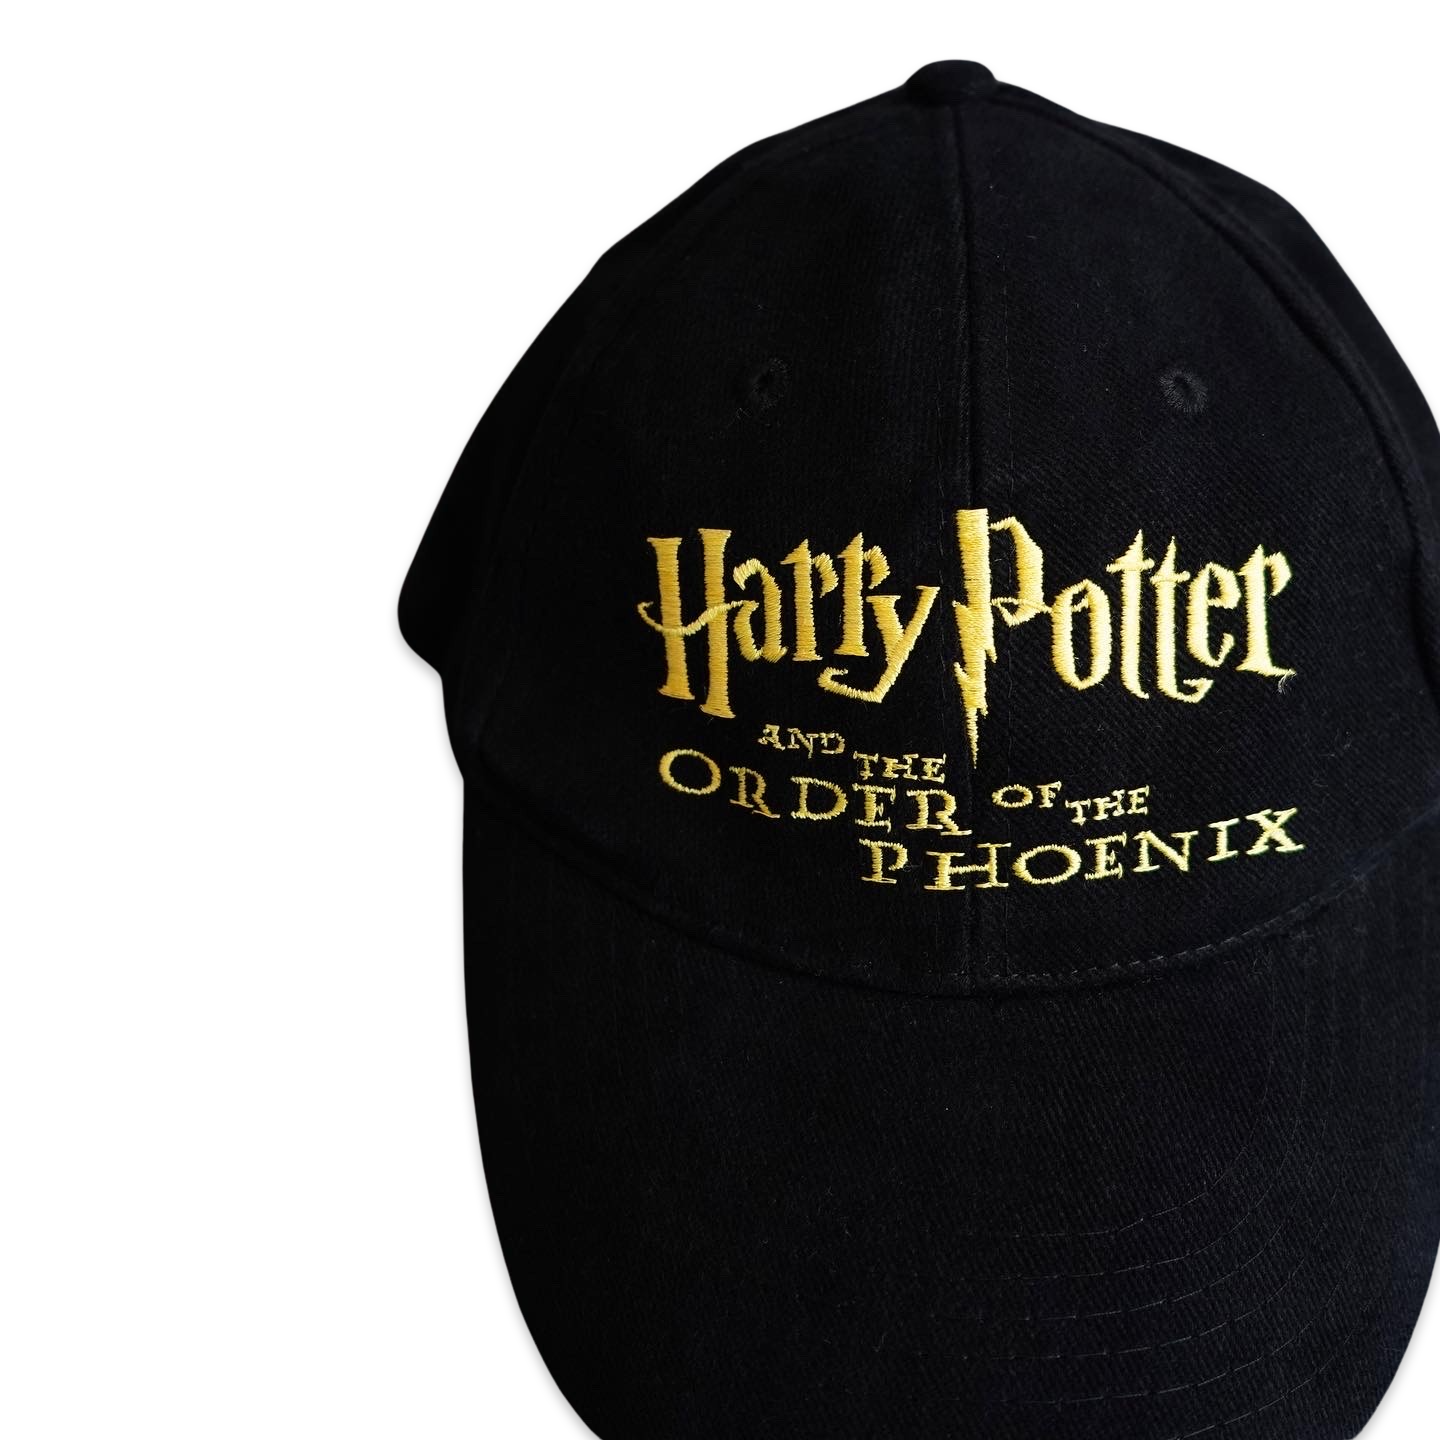 Harry Potter "AND THE ORDER OF THE PHOENIX" Promo Hat